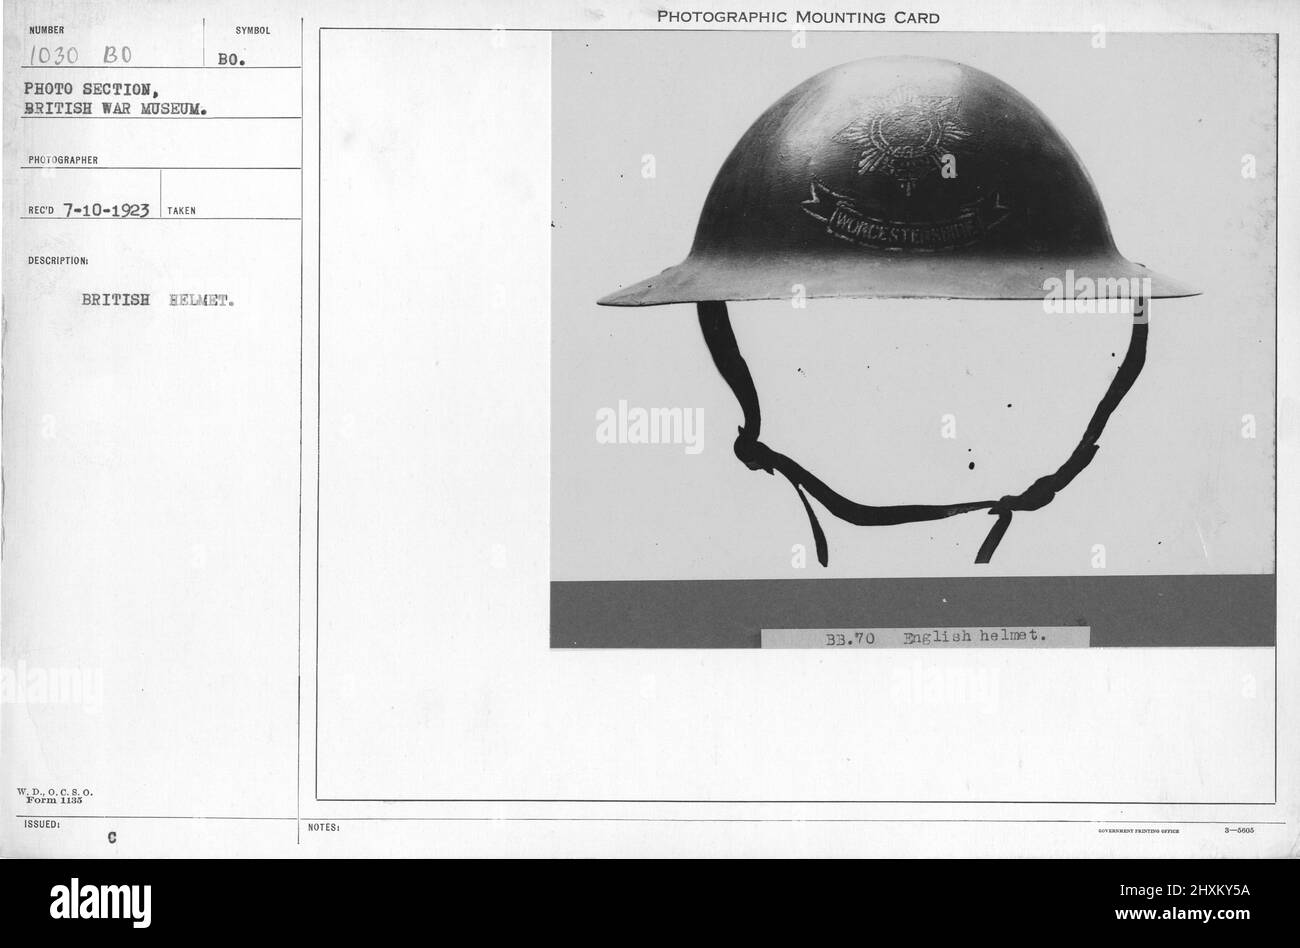 British helmet. Collection of World War I Photographs, 1914-1918 that depict the military activities of British and other nation's armed forces and personnel during World War I. Stock Photo